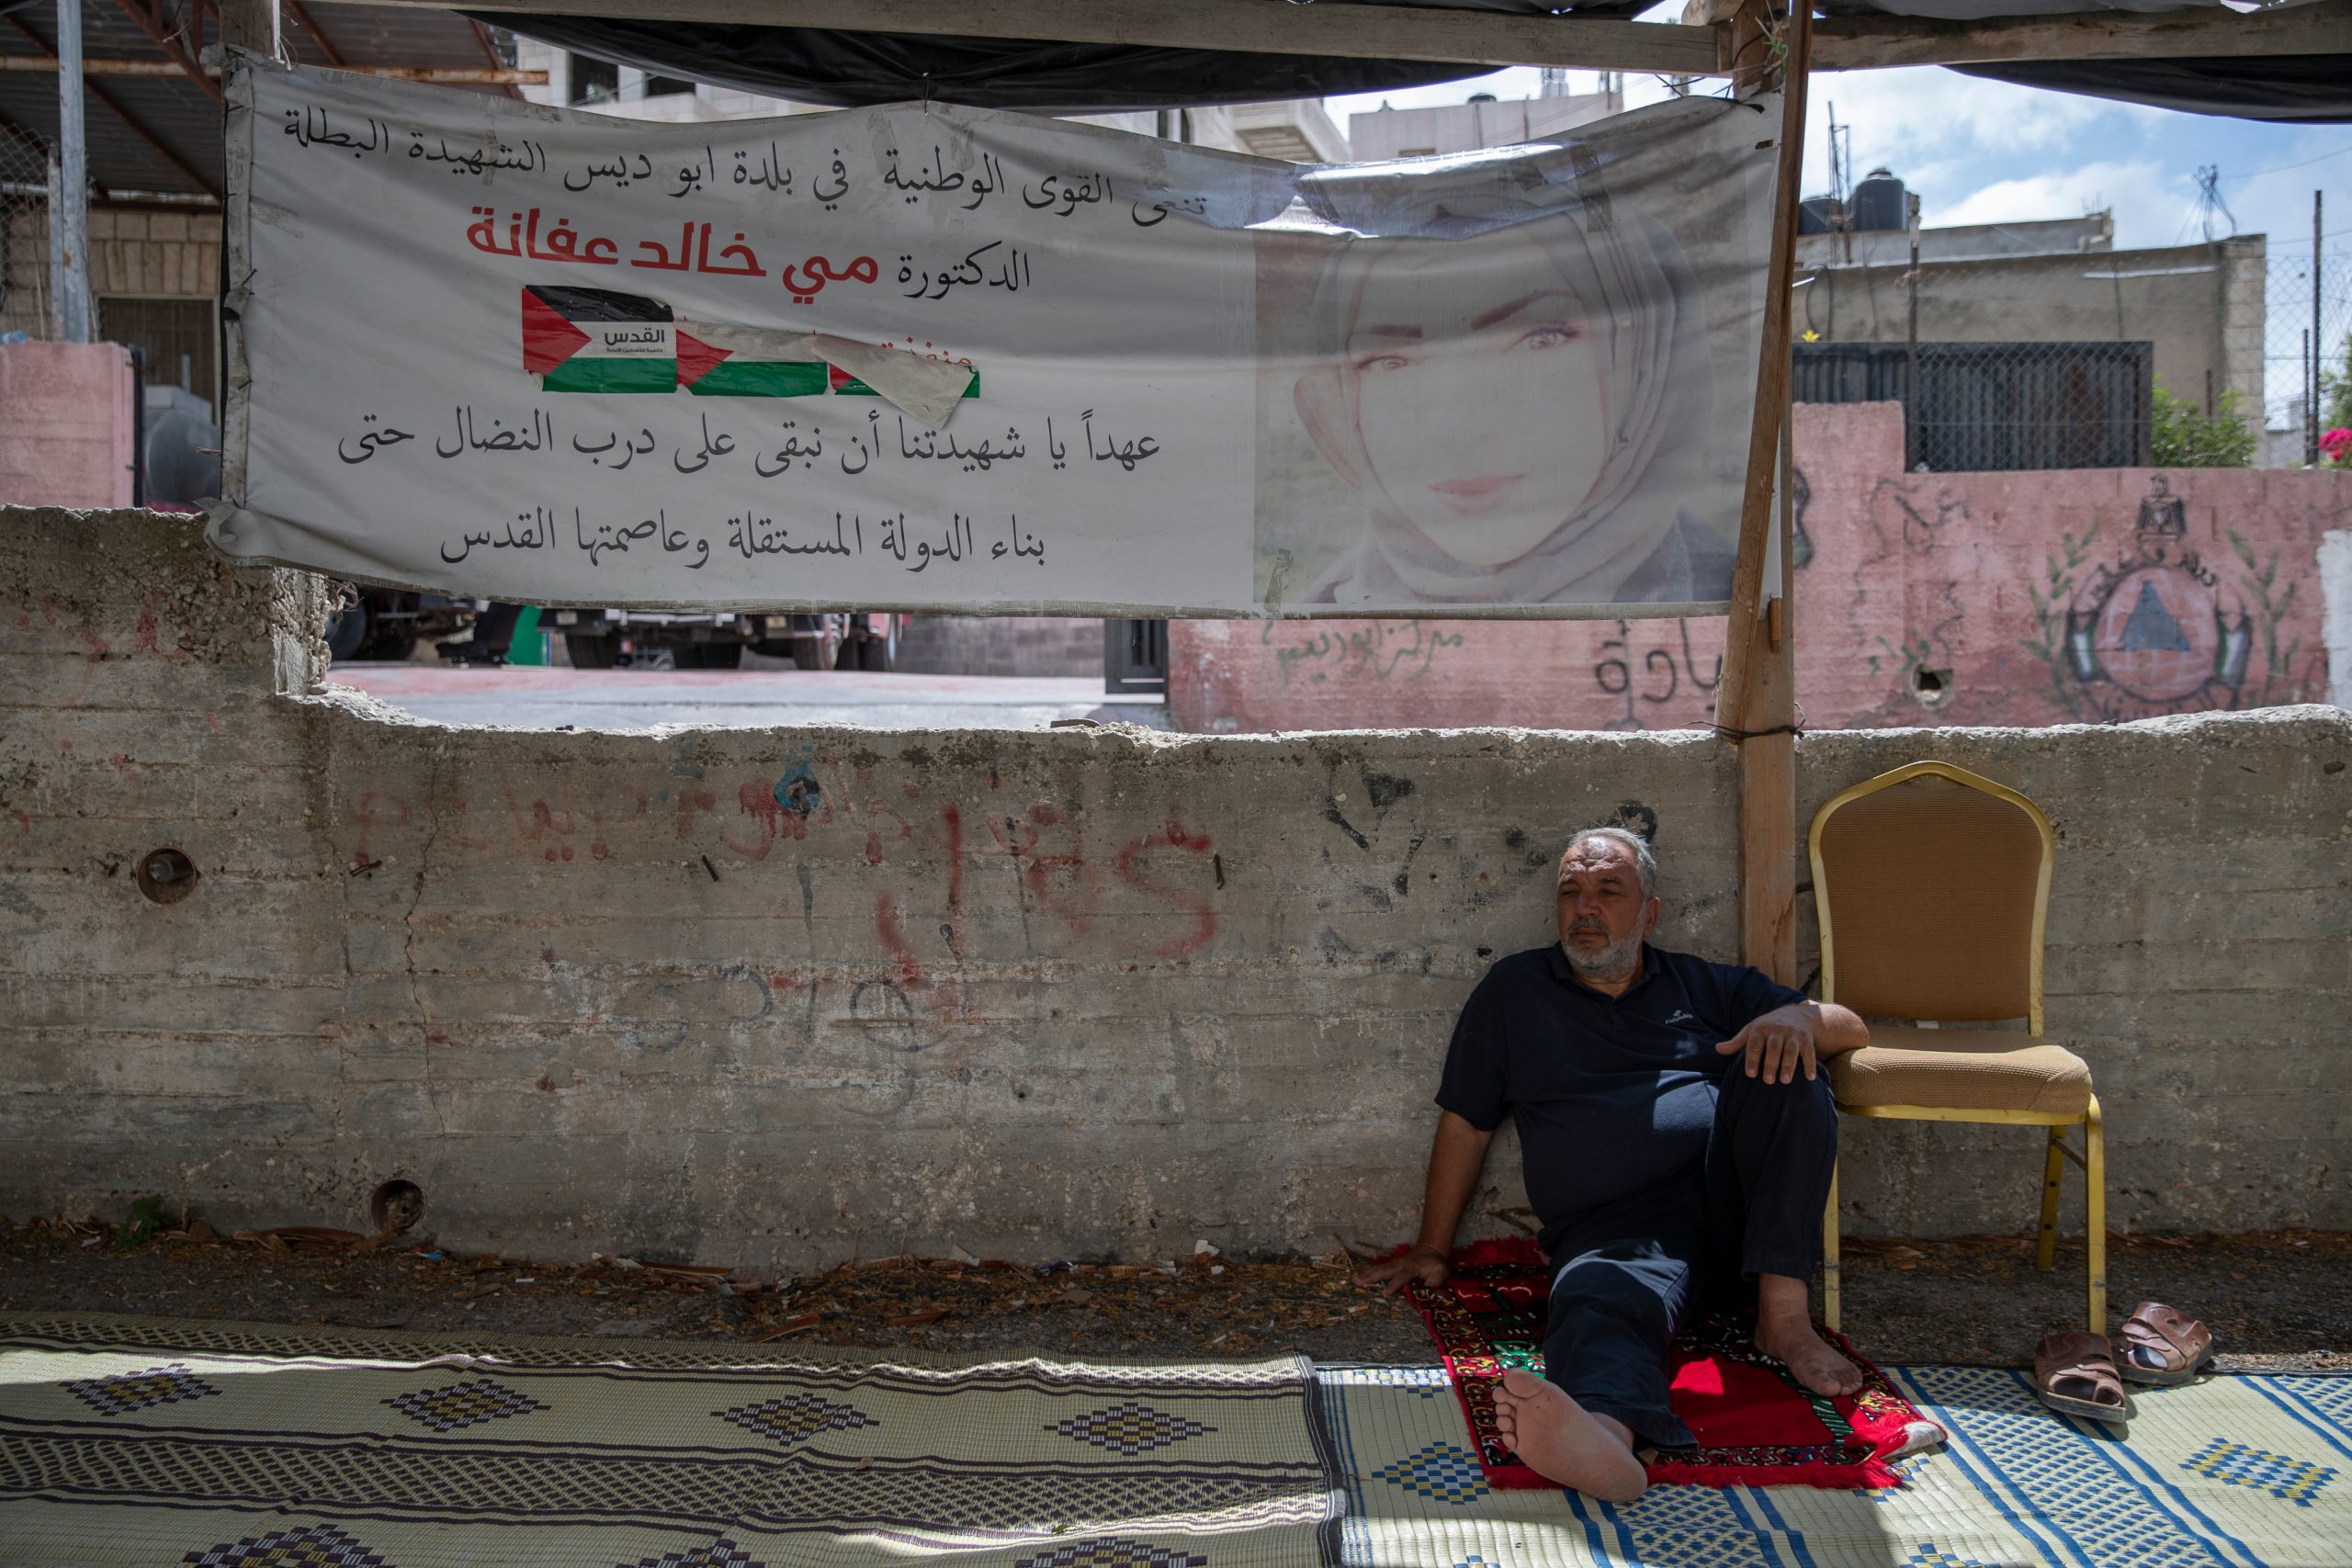 Israel, Palestinian militants use bodies as bargaining chips